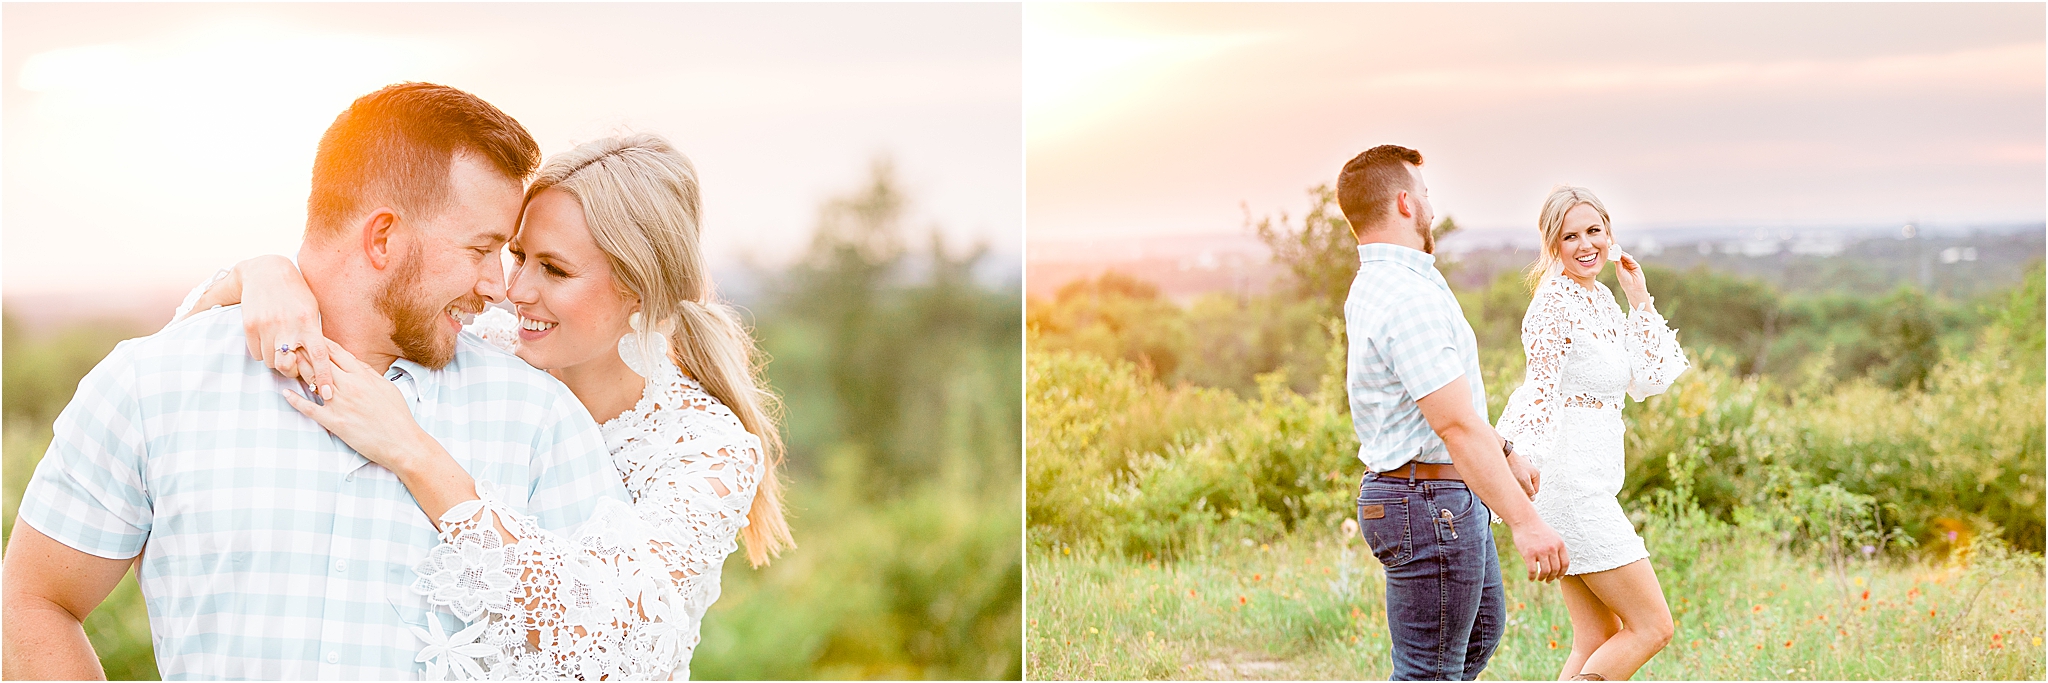 A couple embraces in front of a colorful sunset at nature preserve with lots of greenery in Fort Worth, Texas during their engagement 